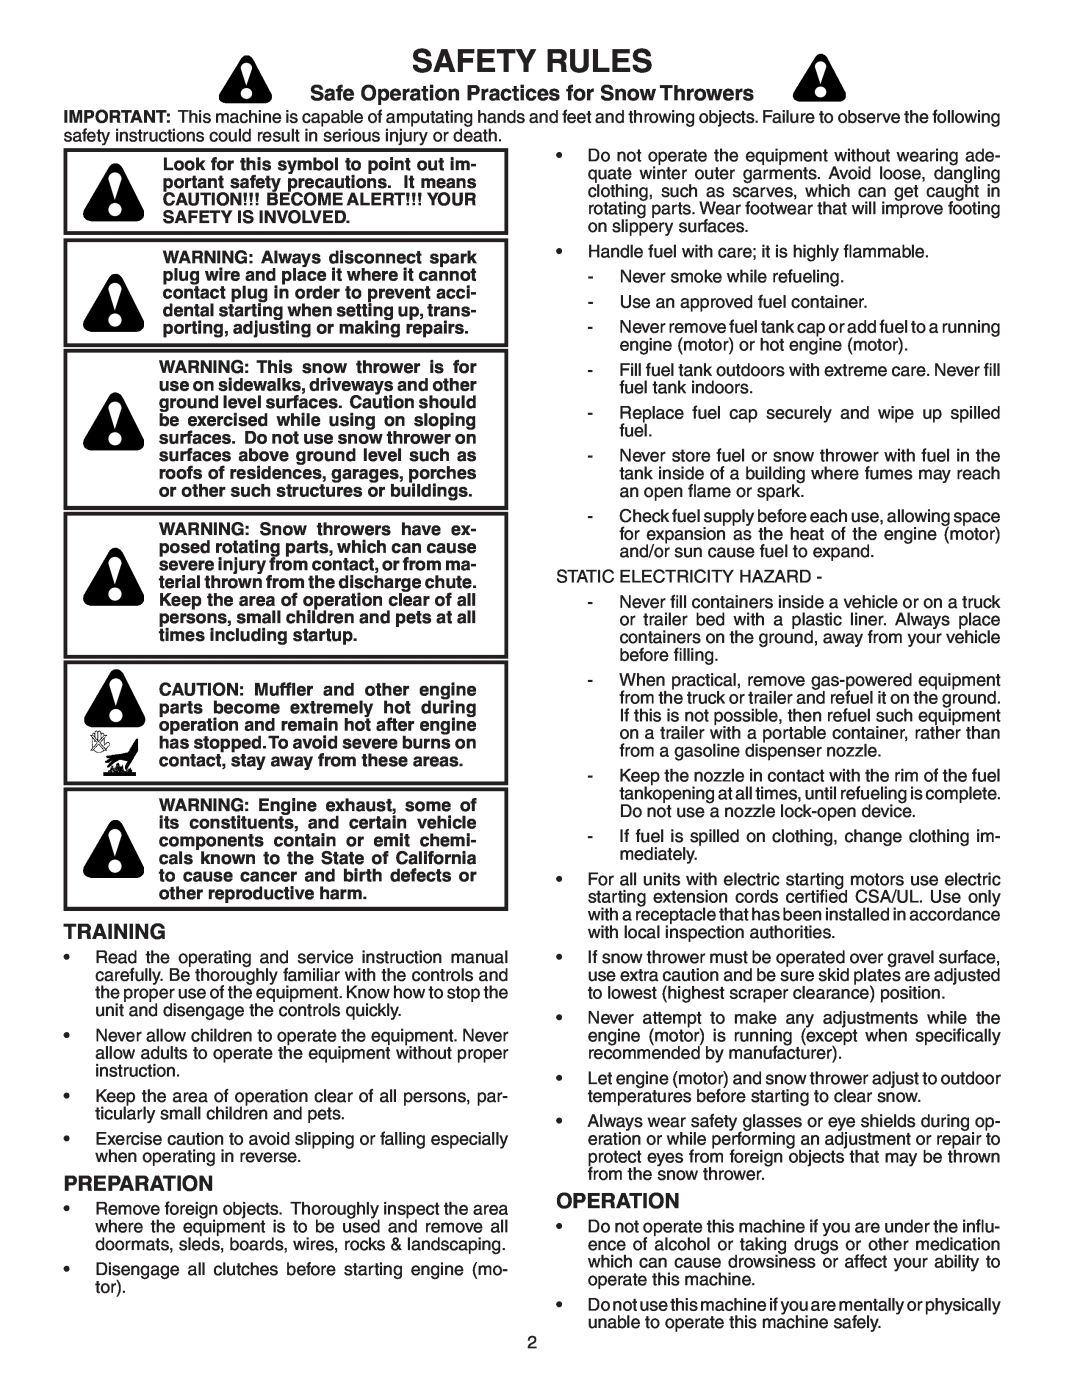 Poulan 187887 owner manual Safety Rules, Safe Operation Practices for Snow Throwers, Training, Preparation 